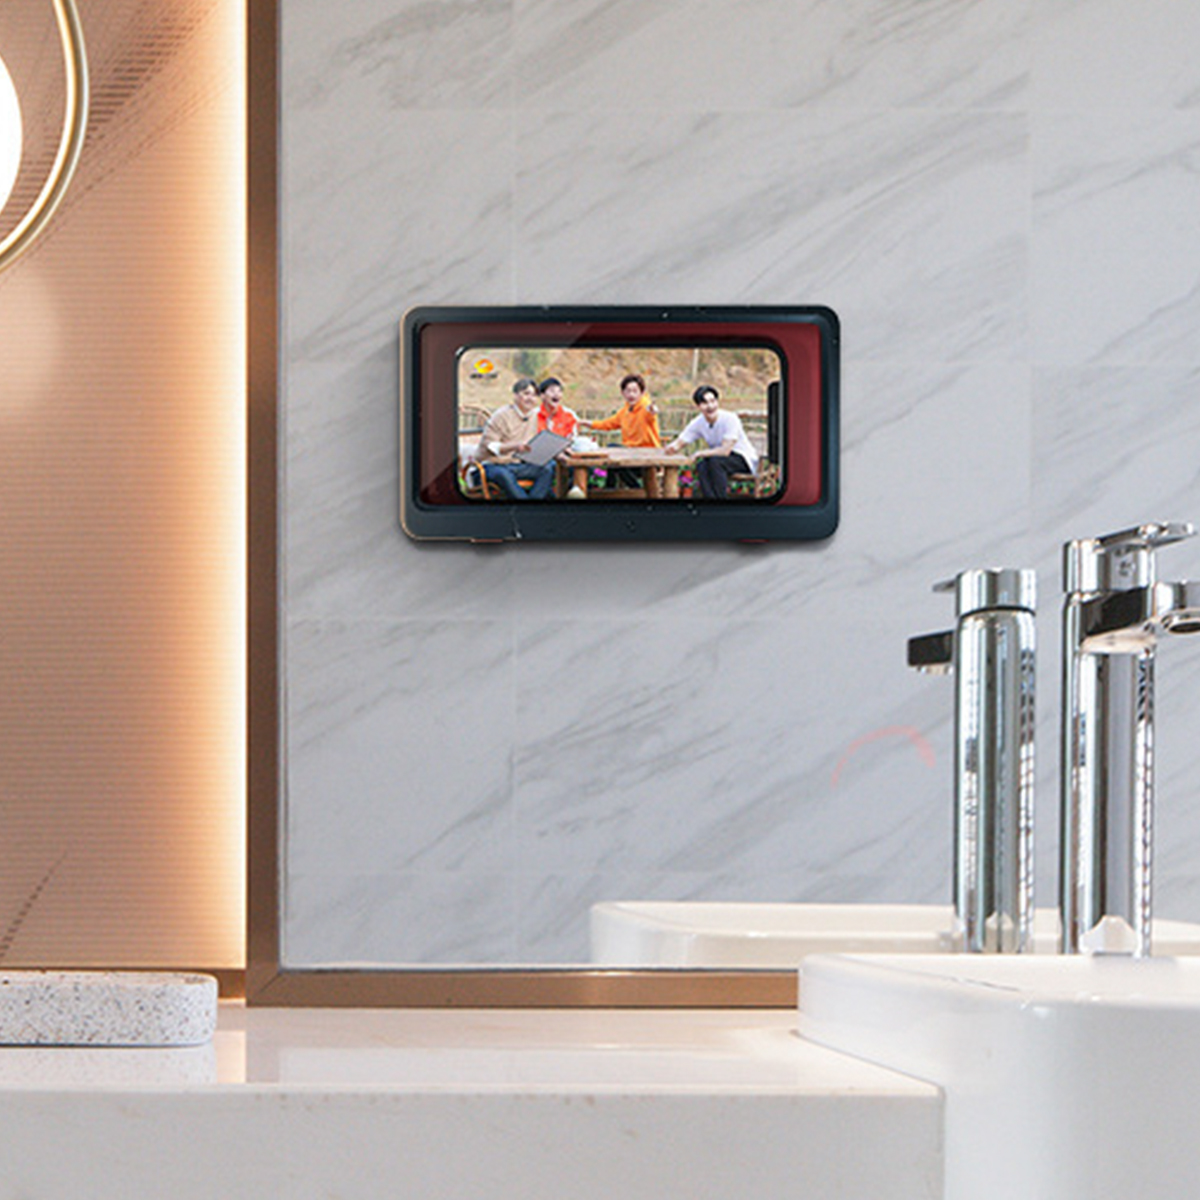 Bathroom-Waterproof-Touch-Screen-Mobile-Cell-Phone-Holder-Case-Wall-Mount-Storage-Box-Under-68-inche-1750862-11